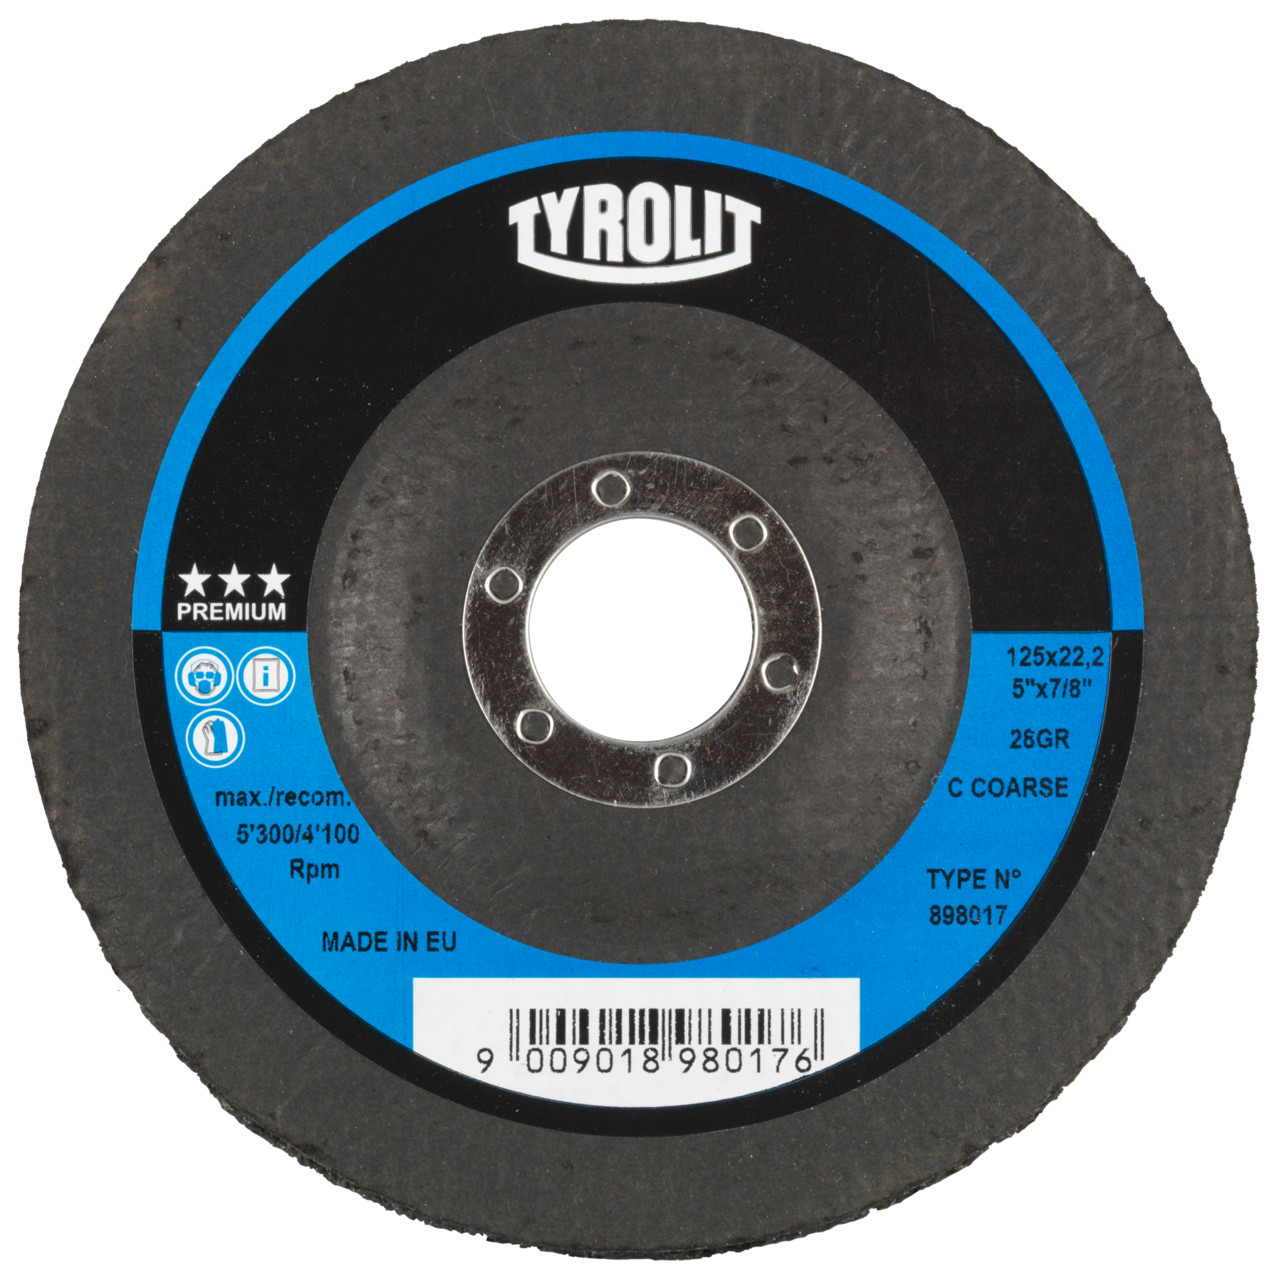 Tyrolit Coarse cleaning disc DxH 178x22.2 Universally applicable, C GROB, shape: 28- (coarse cleaning disc), Art. 898018